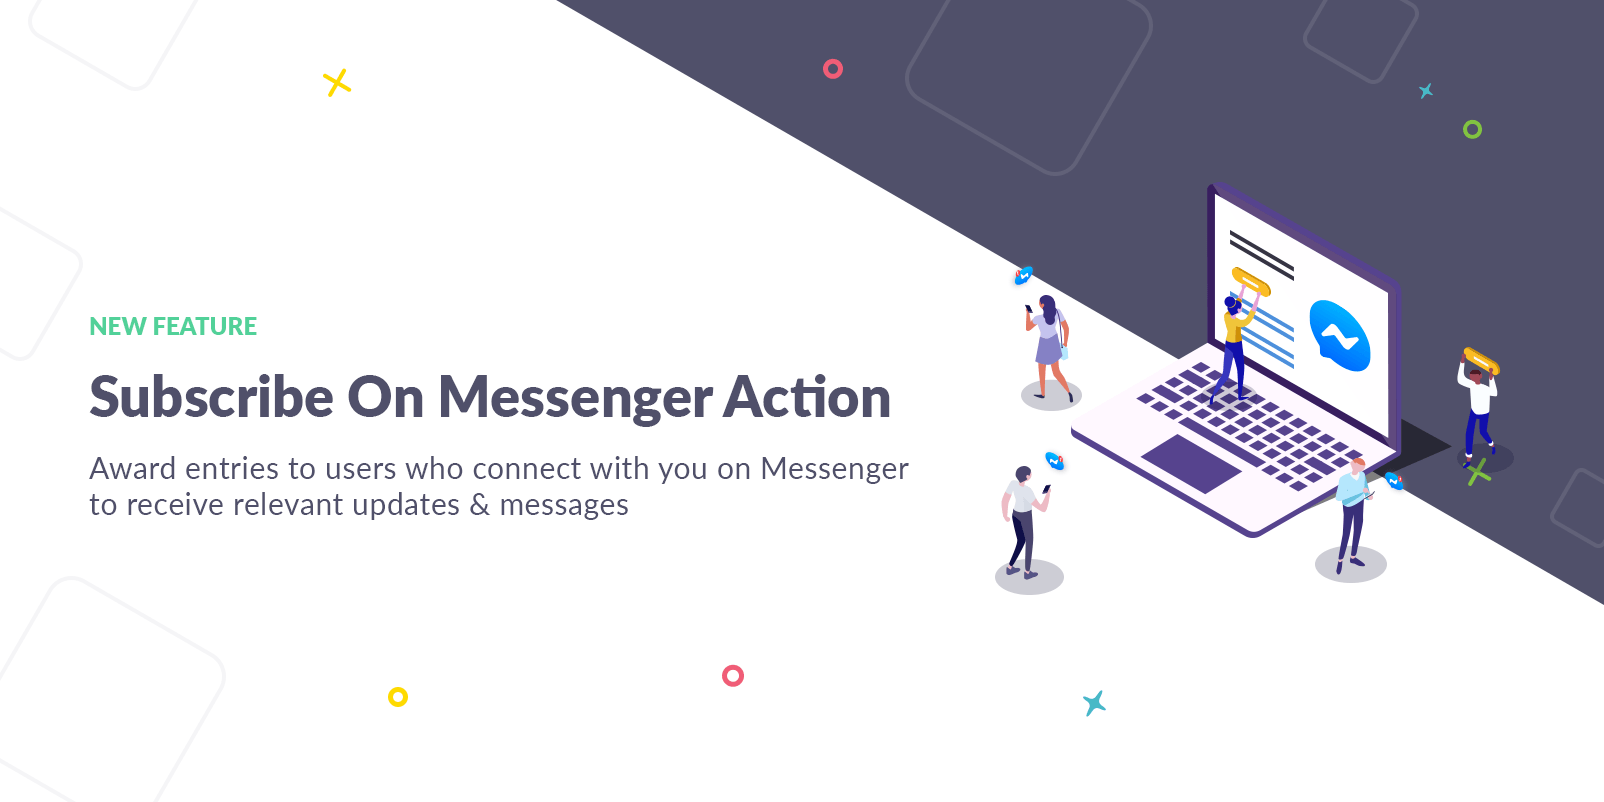 New Feature: Subscribe on Messenger Action from Gleam